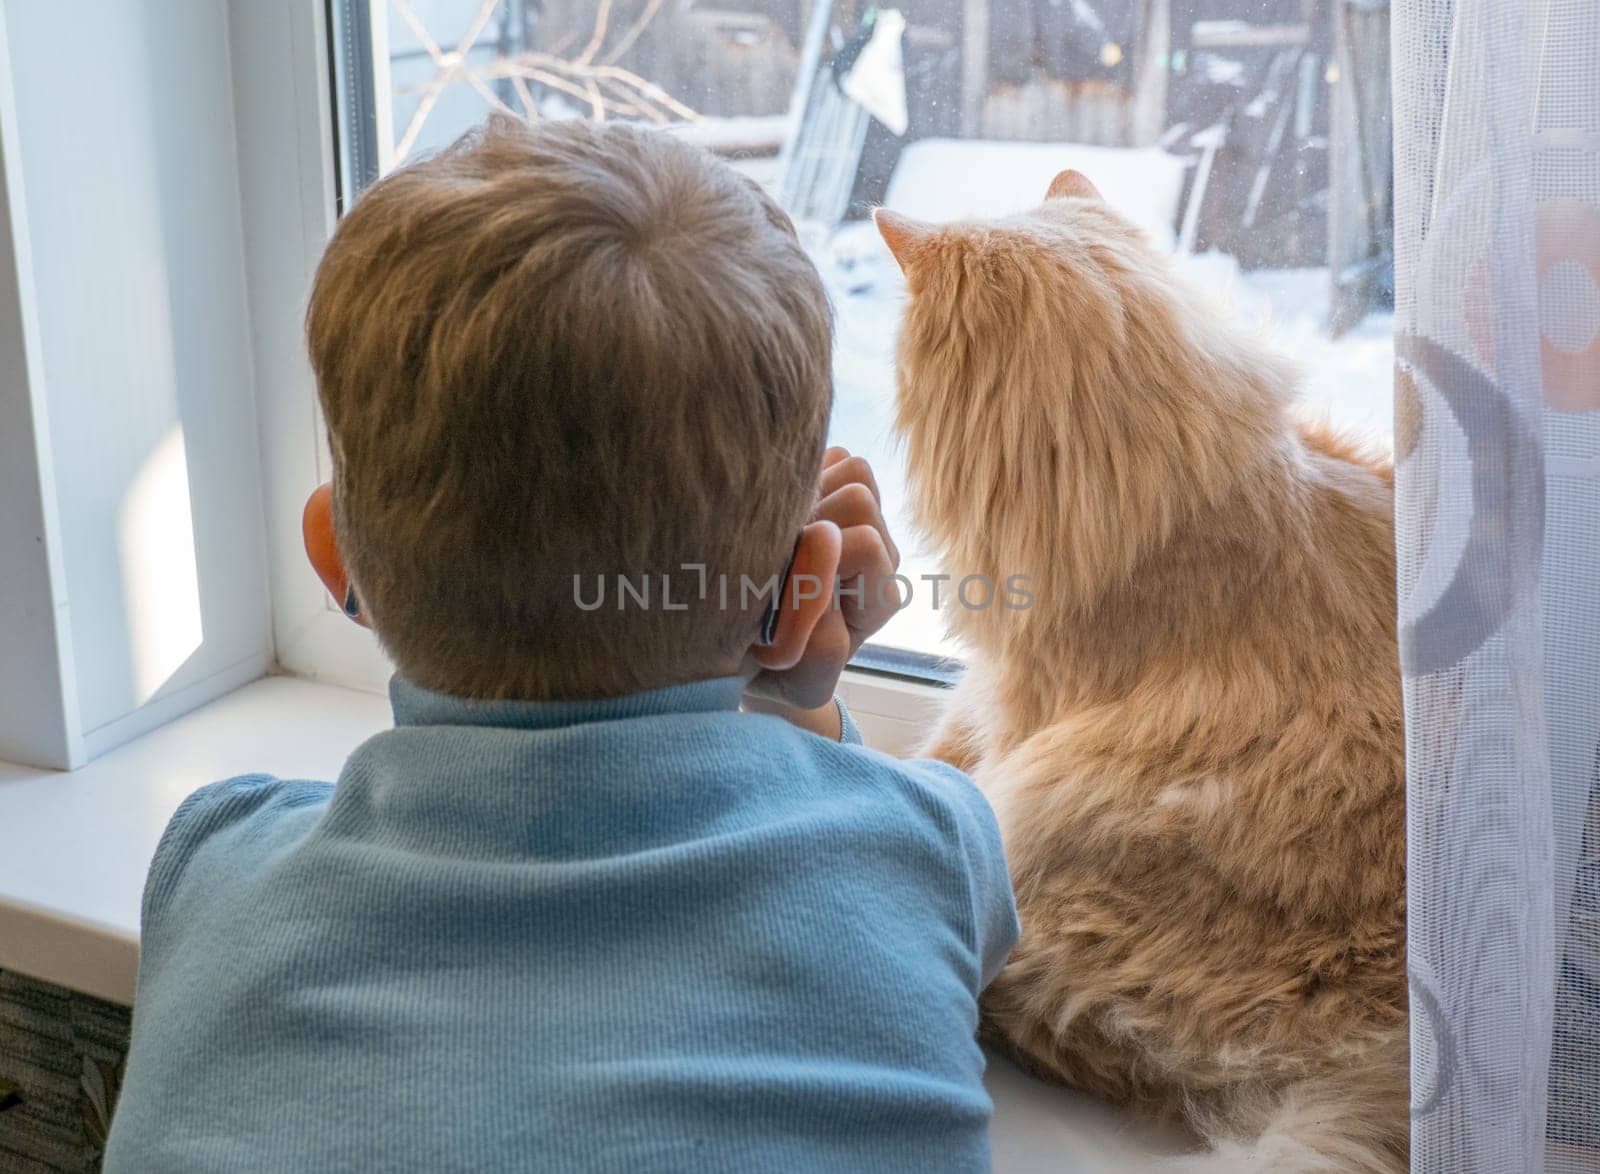 Beautiful scene: two friends looking out the window. Rear view of a little boy with a cat looking out the window, watching the falling snow, focusing on the cat by Ekaterina34